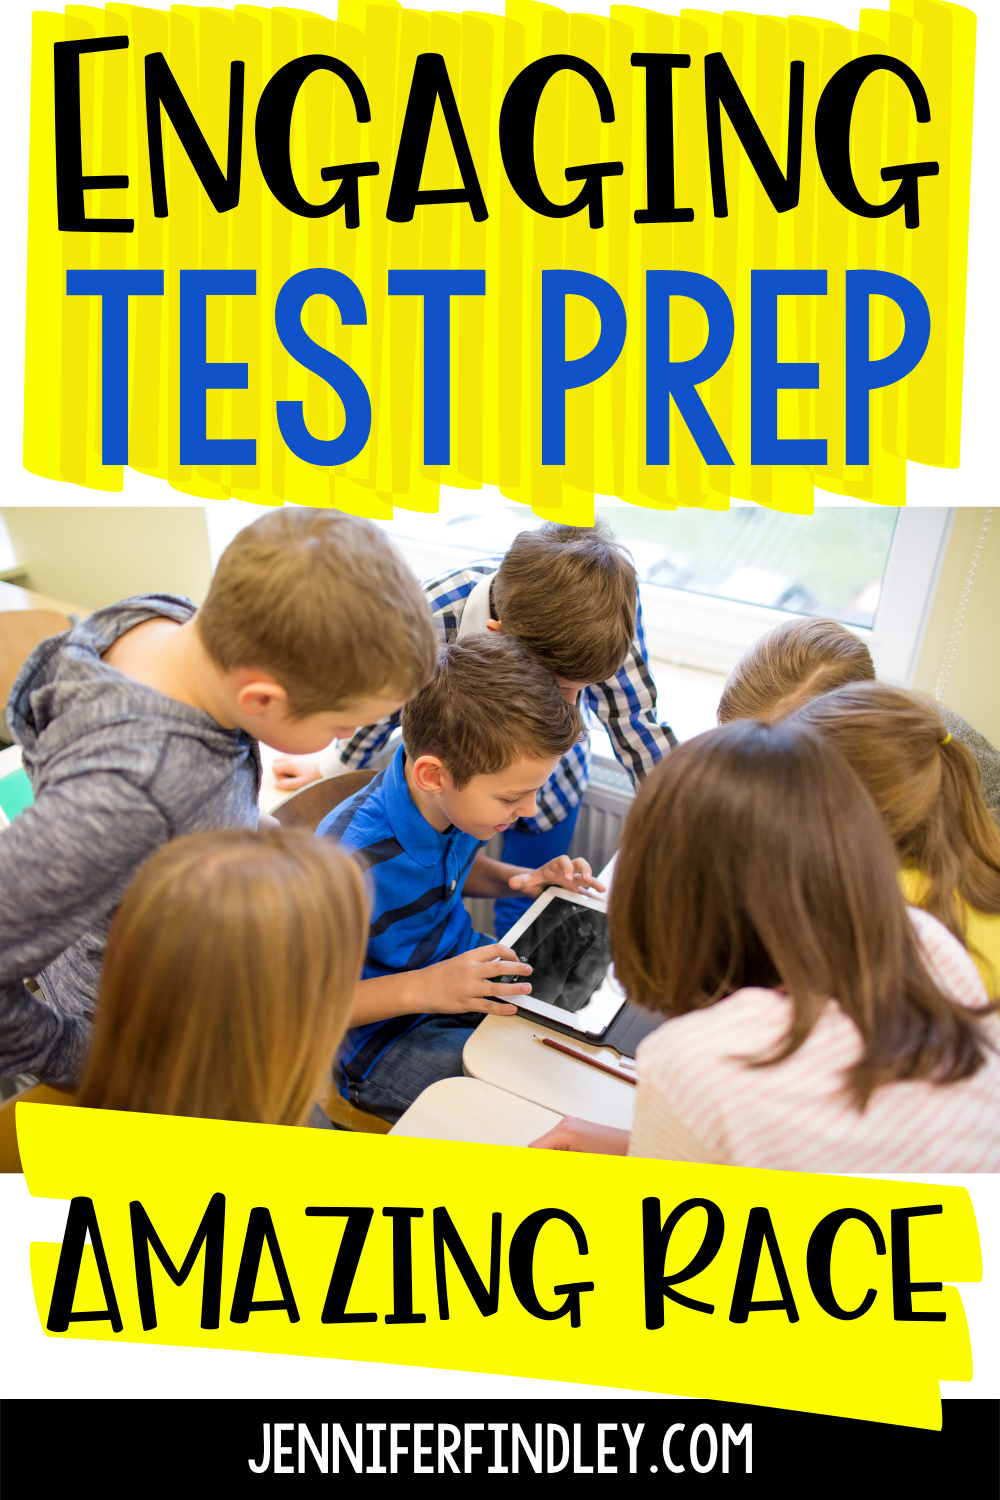 Amazing Race challenges are a super engaging way to review before state assessments. Click through to read more about this fun test prep activity that works with any subject area or skill.